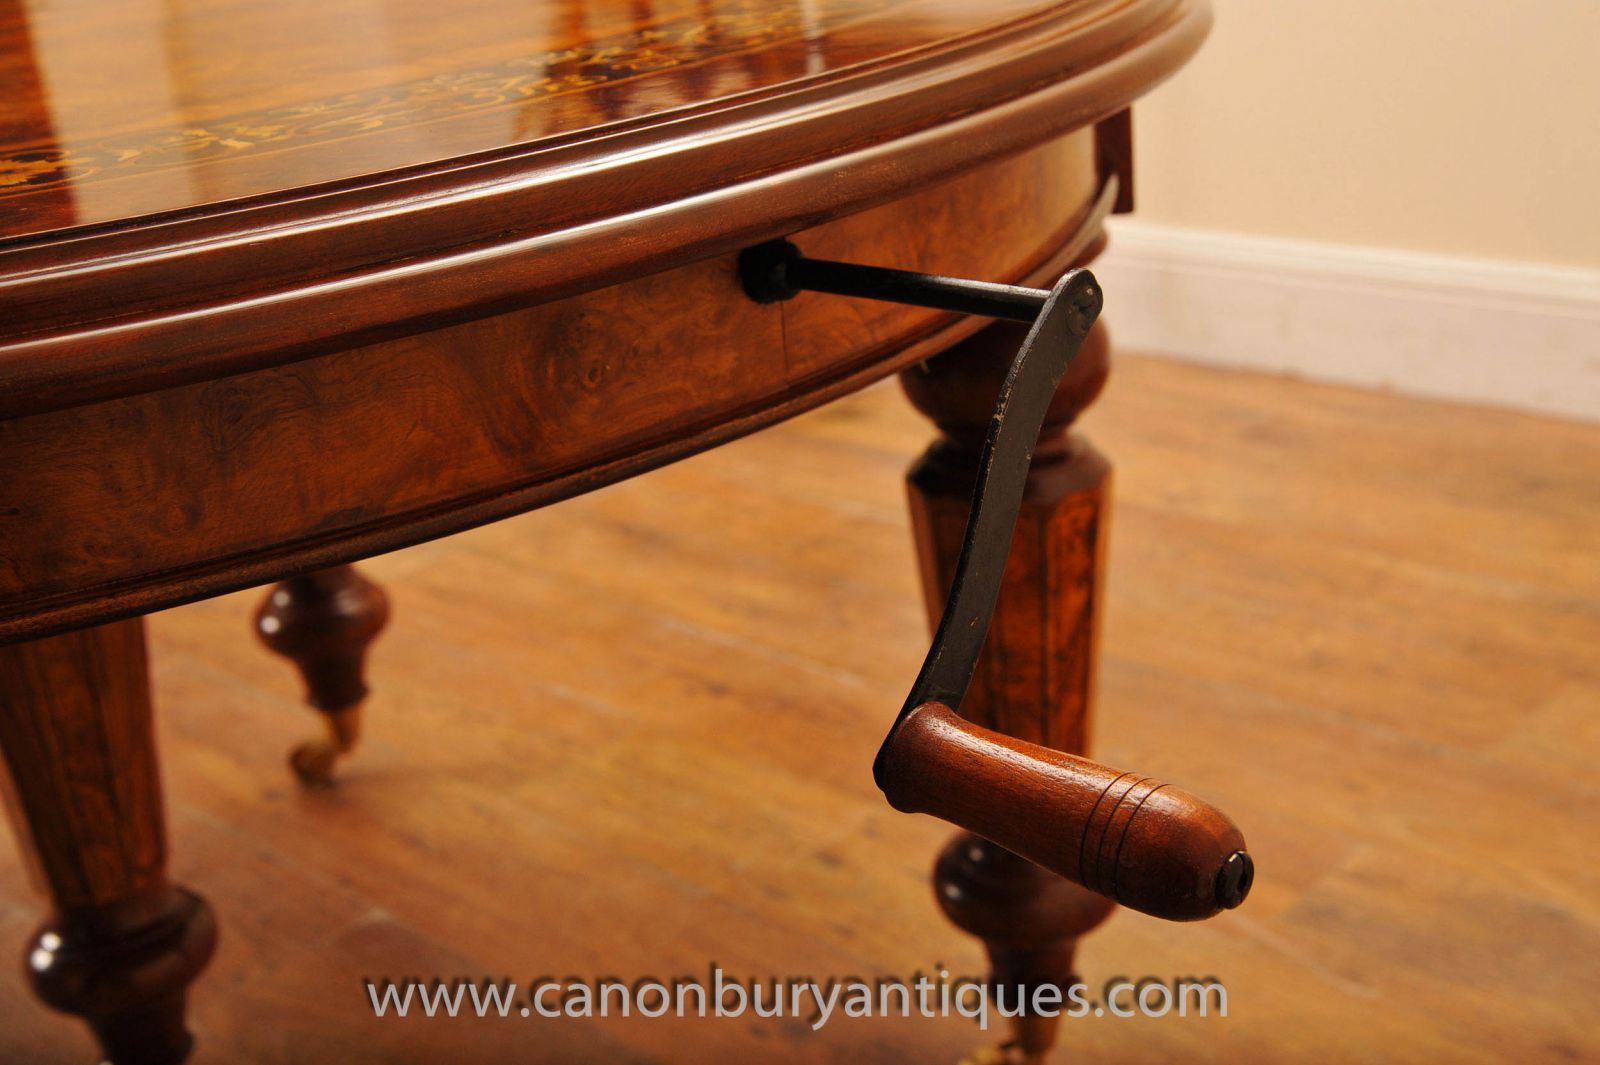 Victorian tables - are you winding me up?